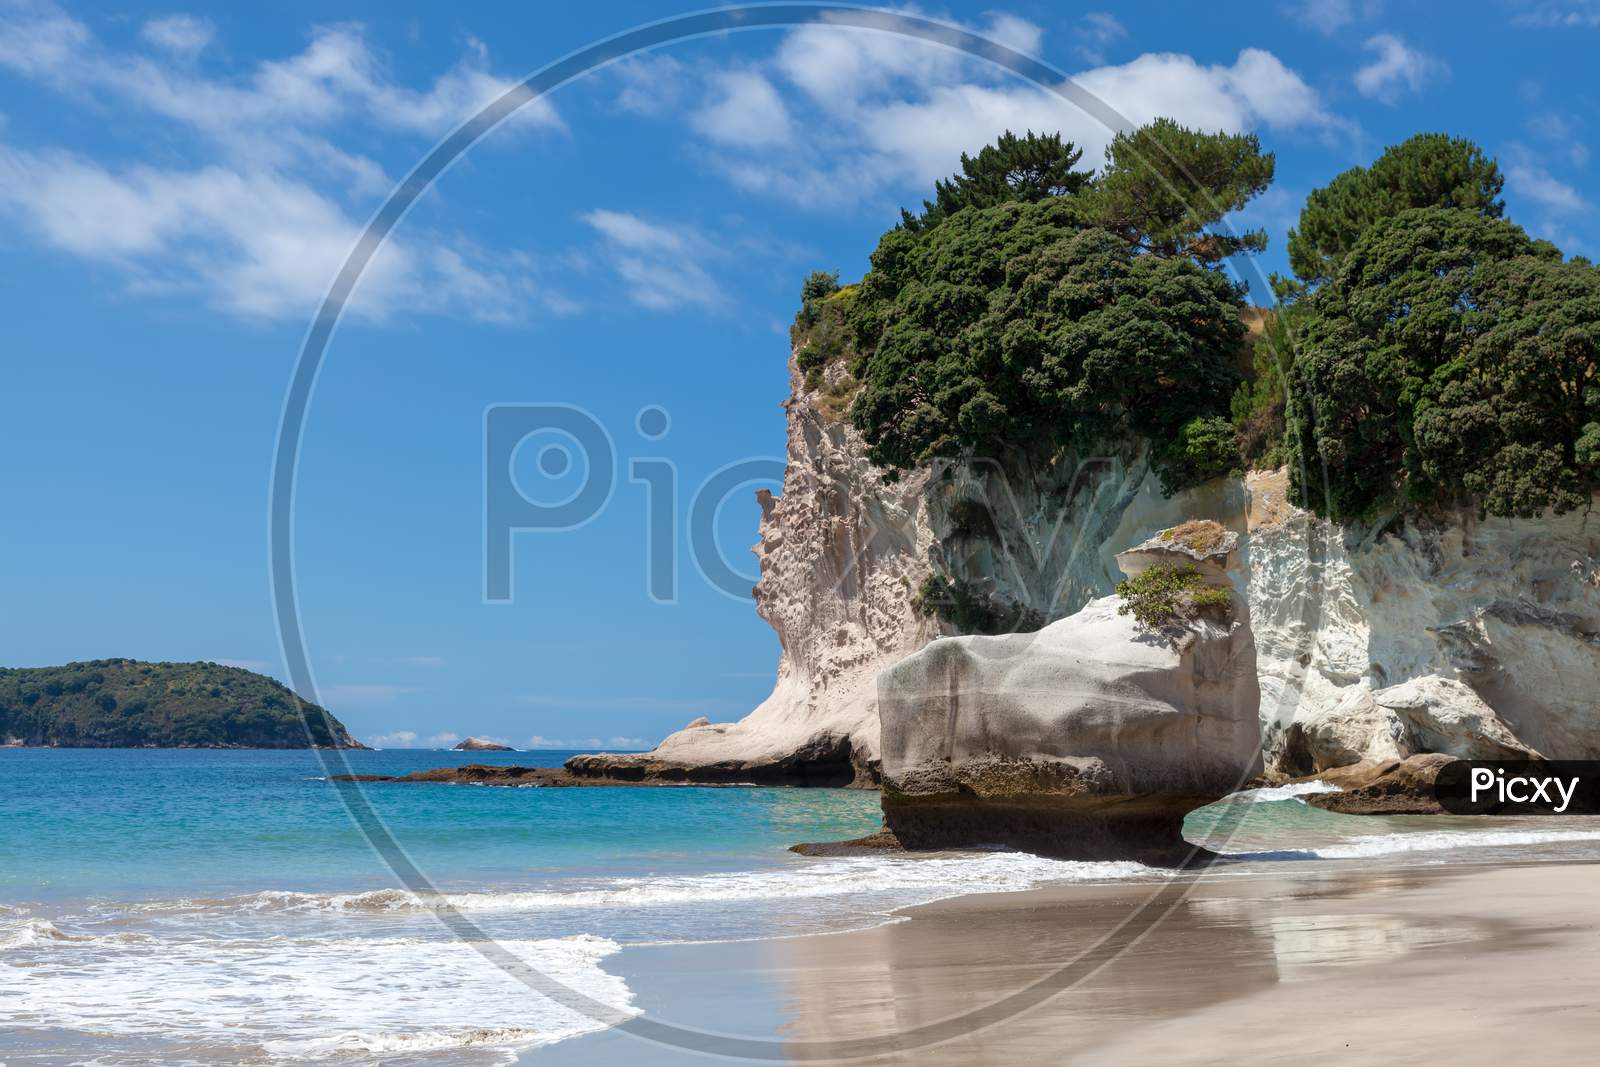 Cathedral Cove Beach Near Hahei In New Zealand